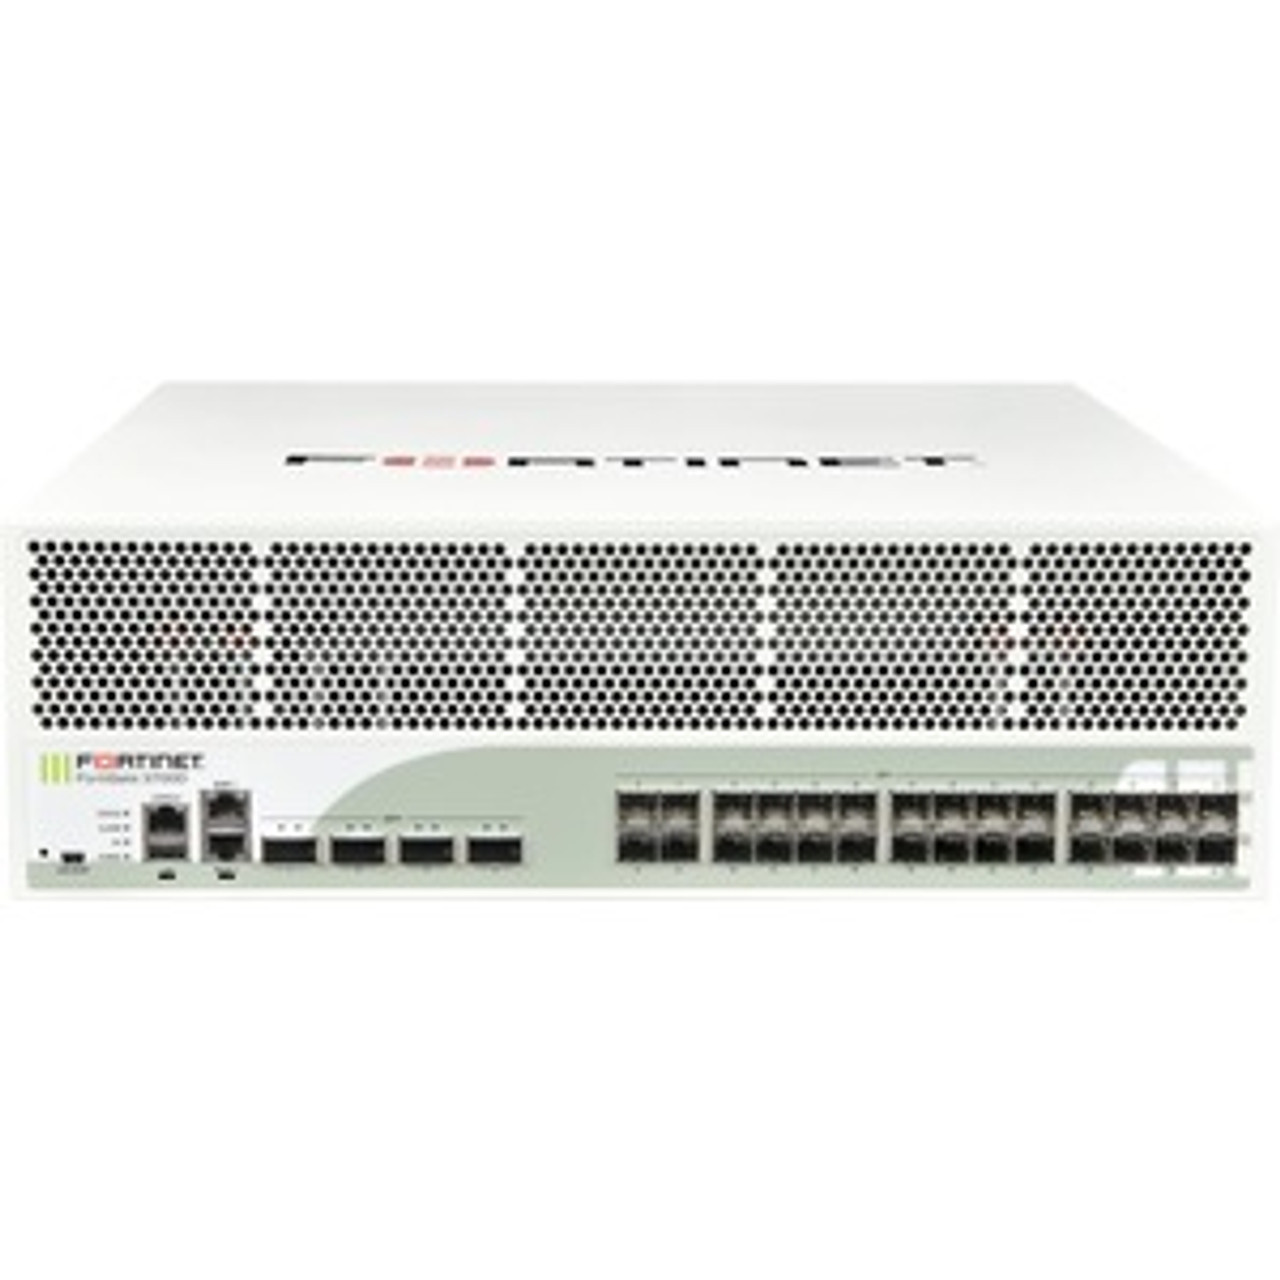 FG-3700D-USG Fortinet 3700D 4-Ports 10GBase-X 40GBase-X 1000Base-X 40 Gigabit Ethernet Manages Switch with 32 x Expansion Slots (Refurbished)